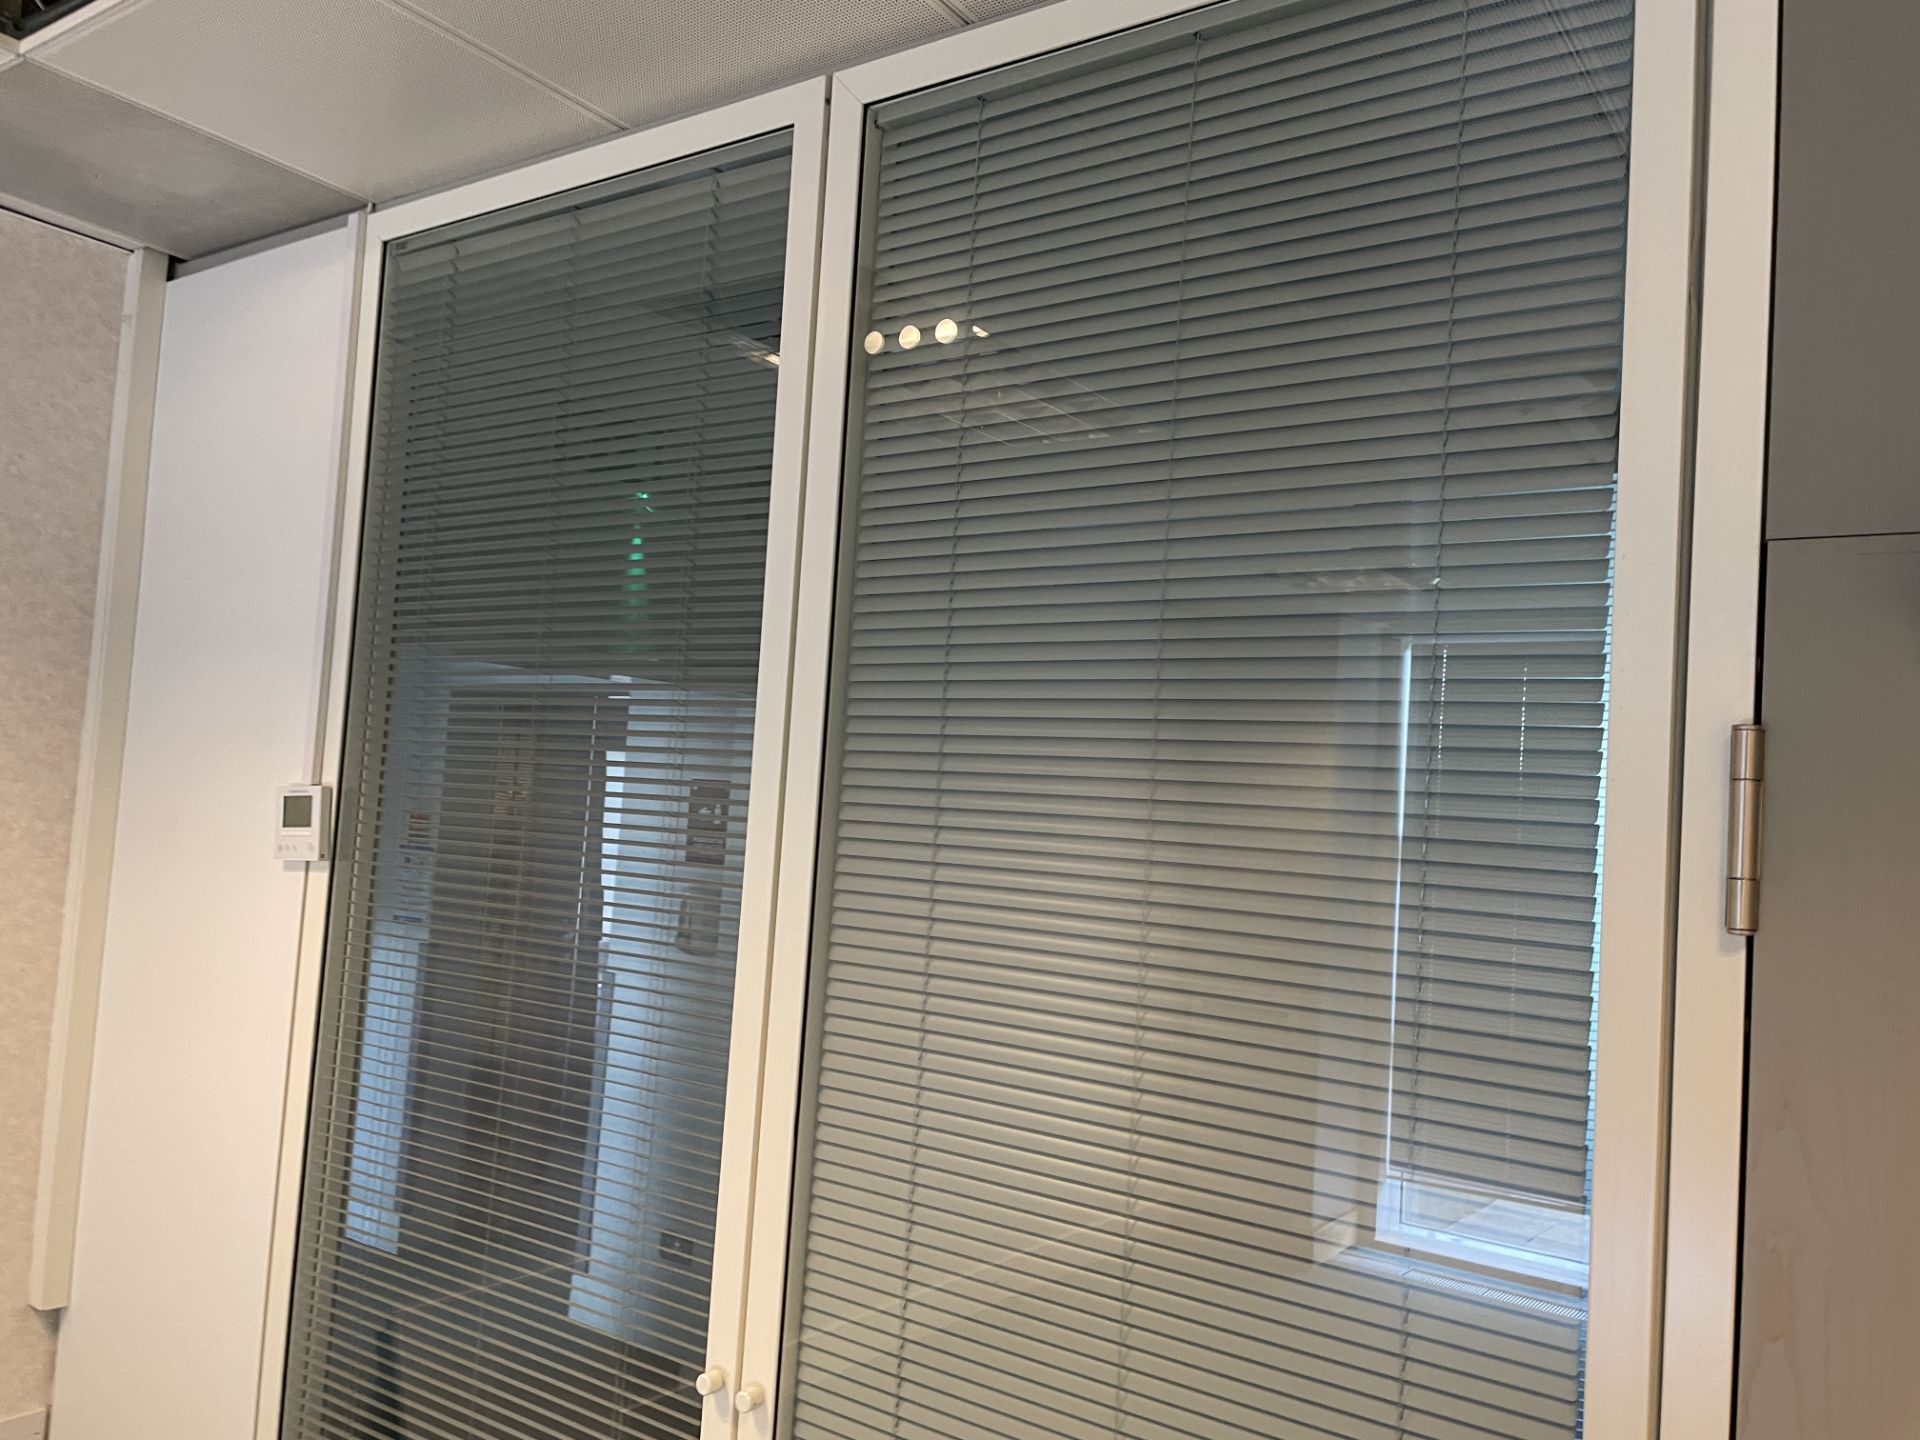 4 x Partition Panels With Privacy Blinds - Each Measures W265 x W100cm - Ref: ED157 - To Be Removed - Image 12 of 13